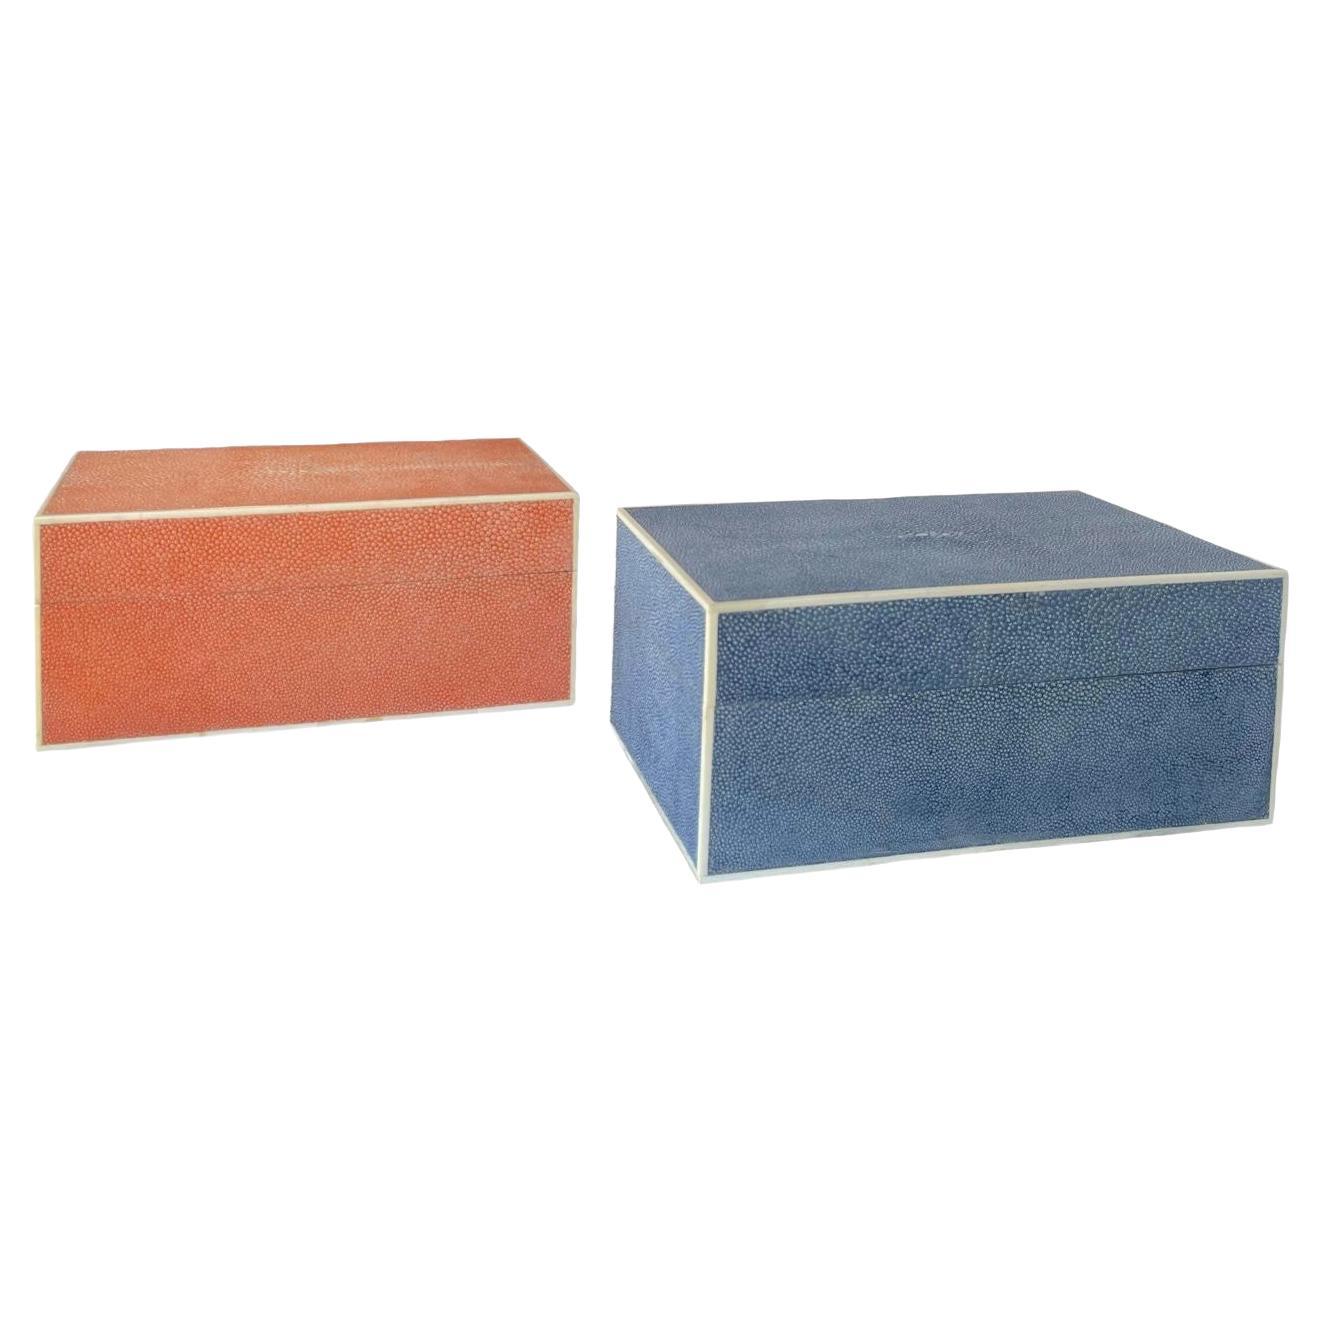 Set of Two Colorful Shagreen Boxes